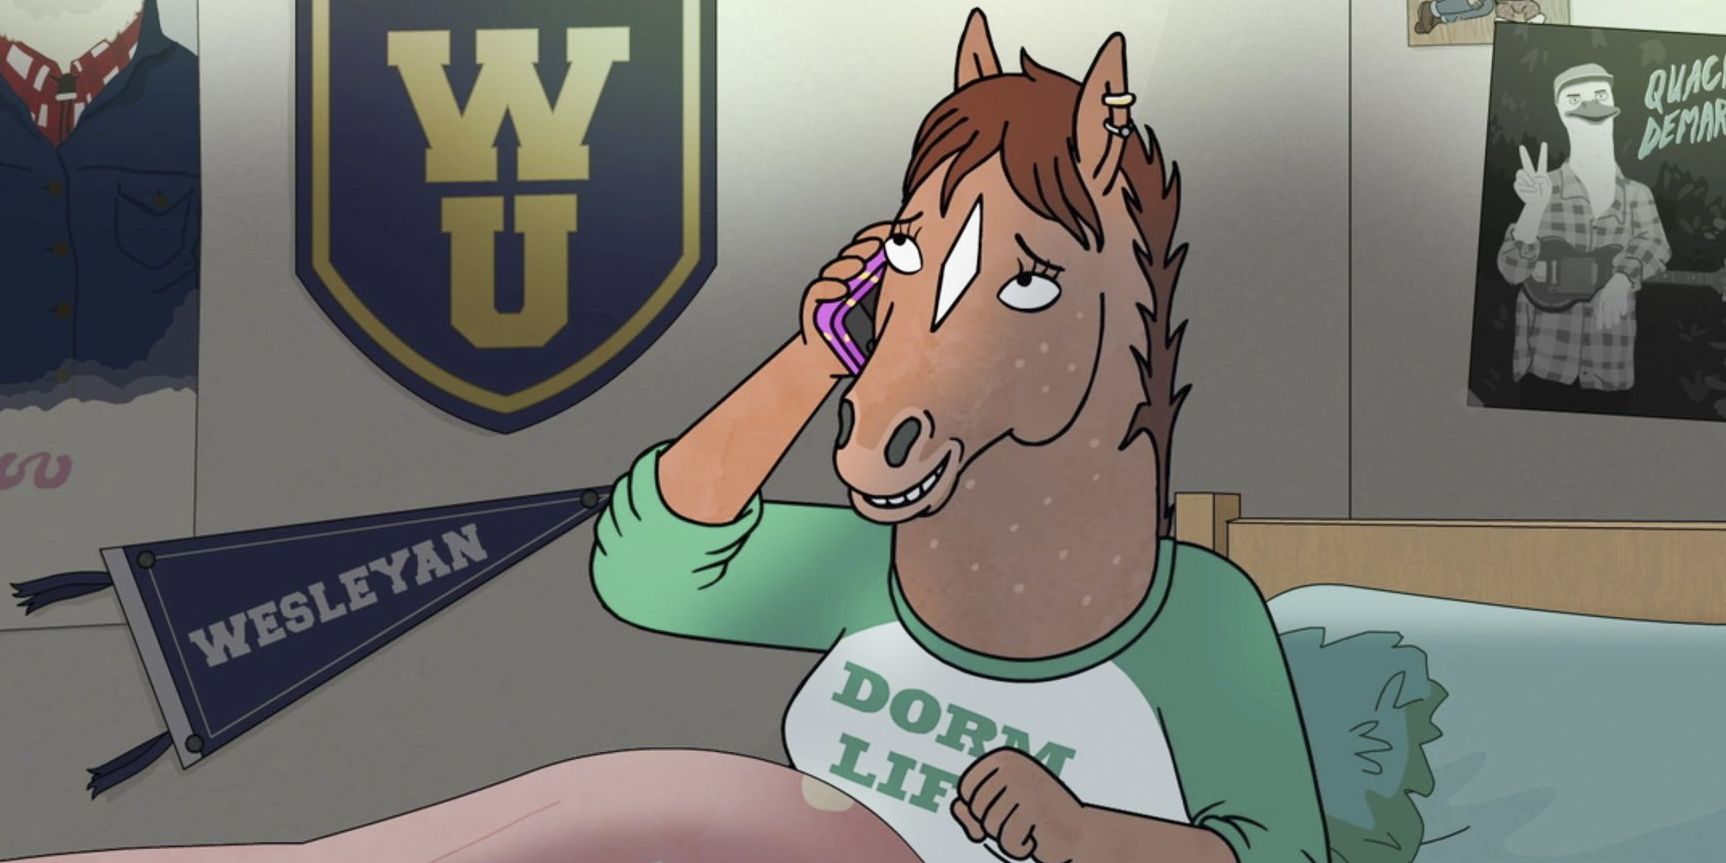 BoJack Horseman 5 Characters Wed Love To Be Friends With (& 5 Wed Rather Avoid)